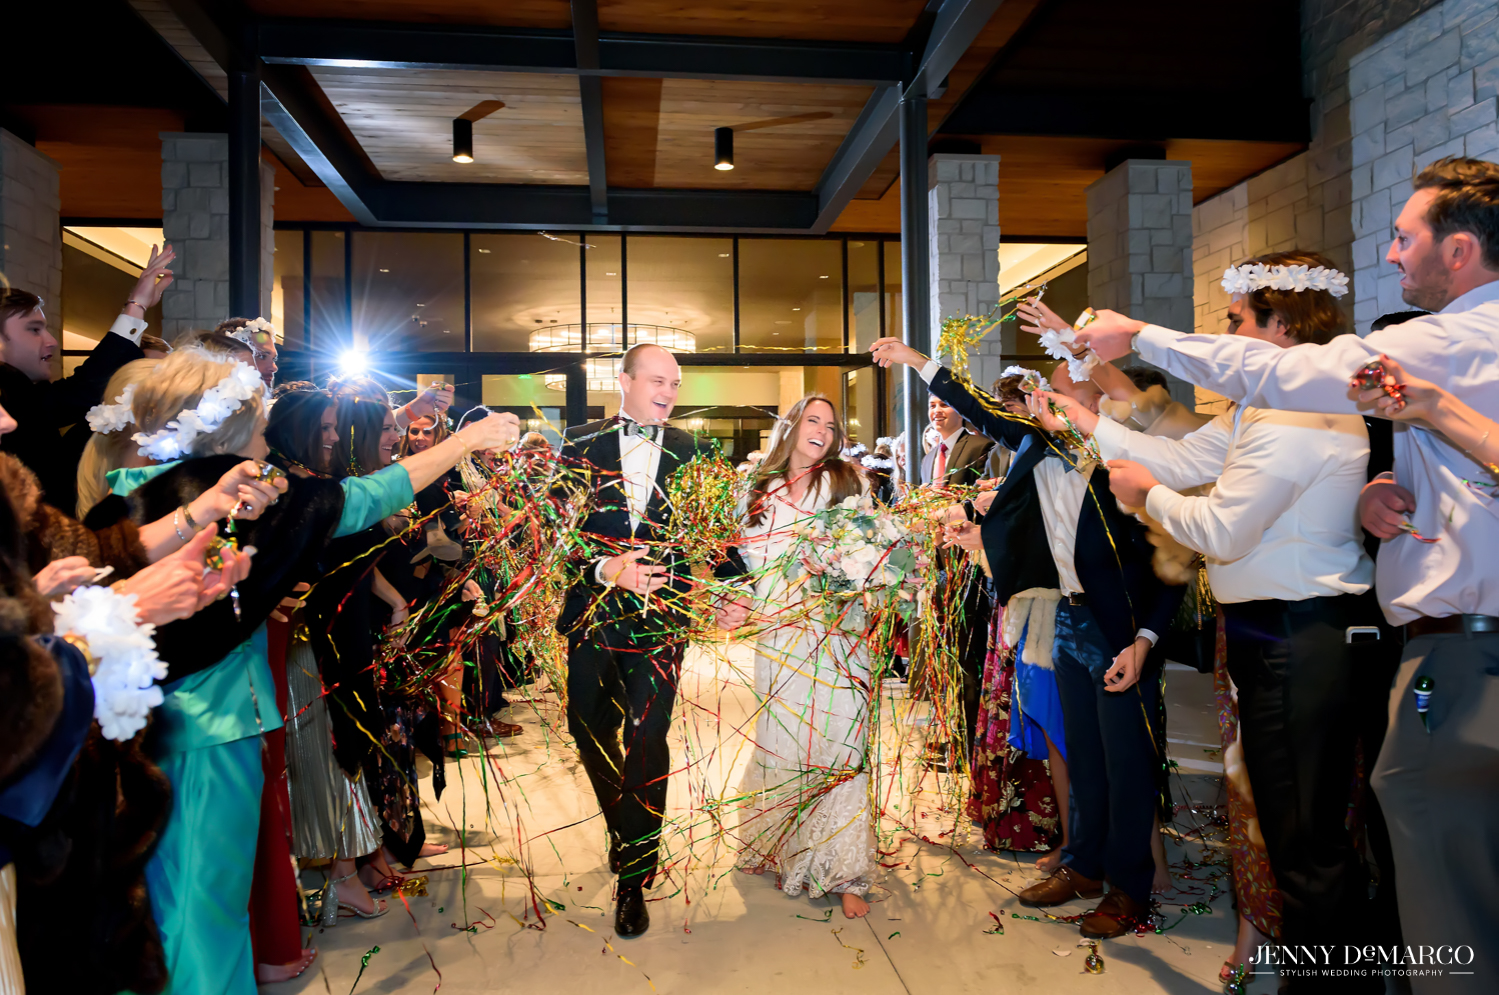 Bride and Groom covered in confetti as they walk out of wedding reception